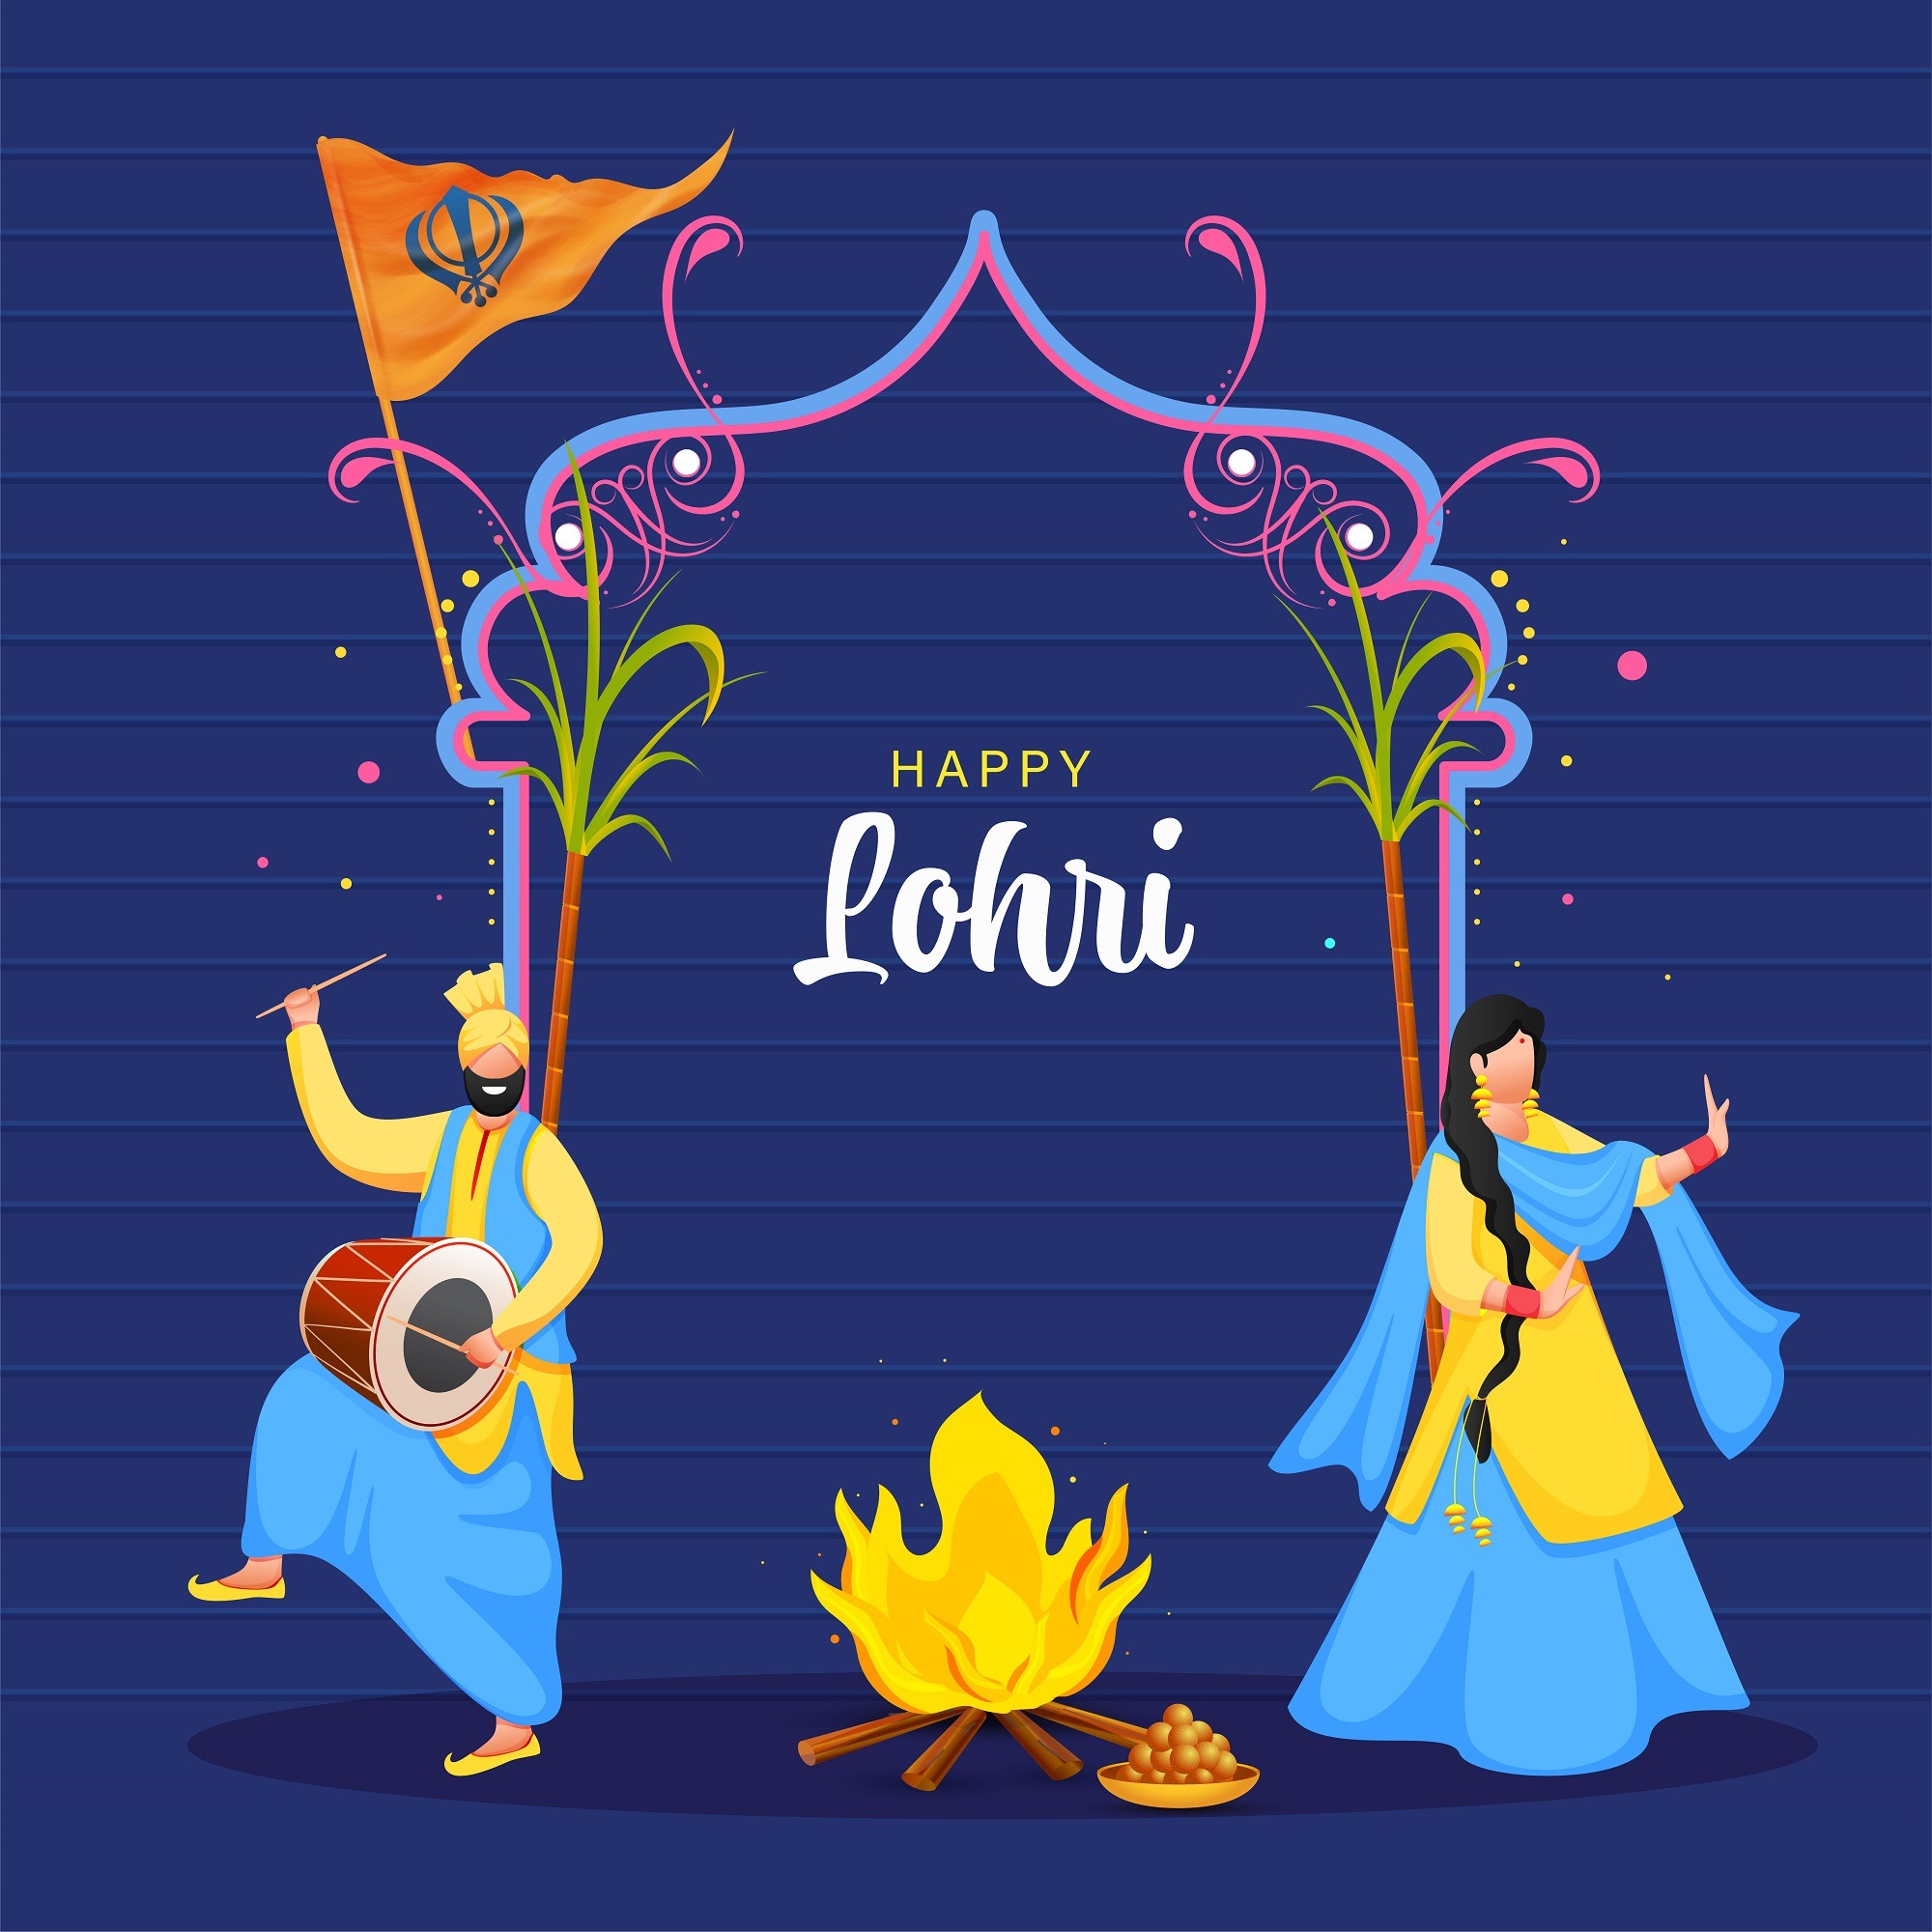 Happy Lohri text with blue background and two dancers